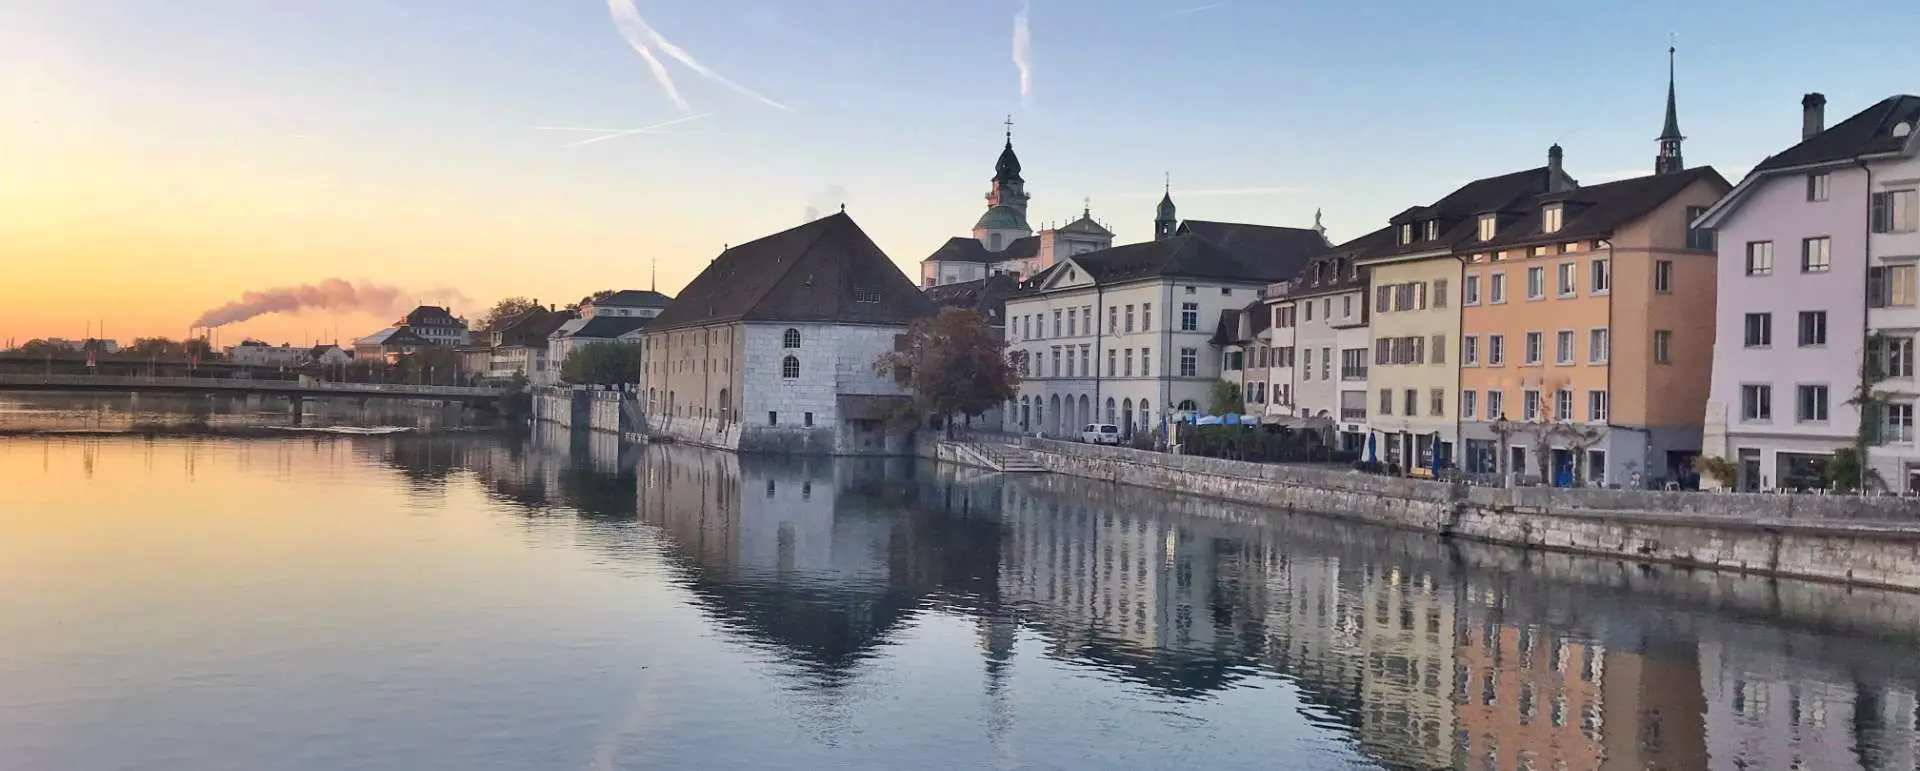 Solothurn - the destination for groups